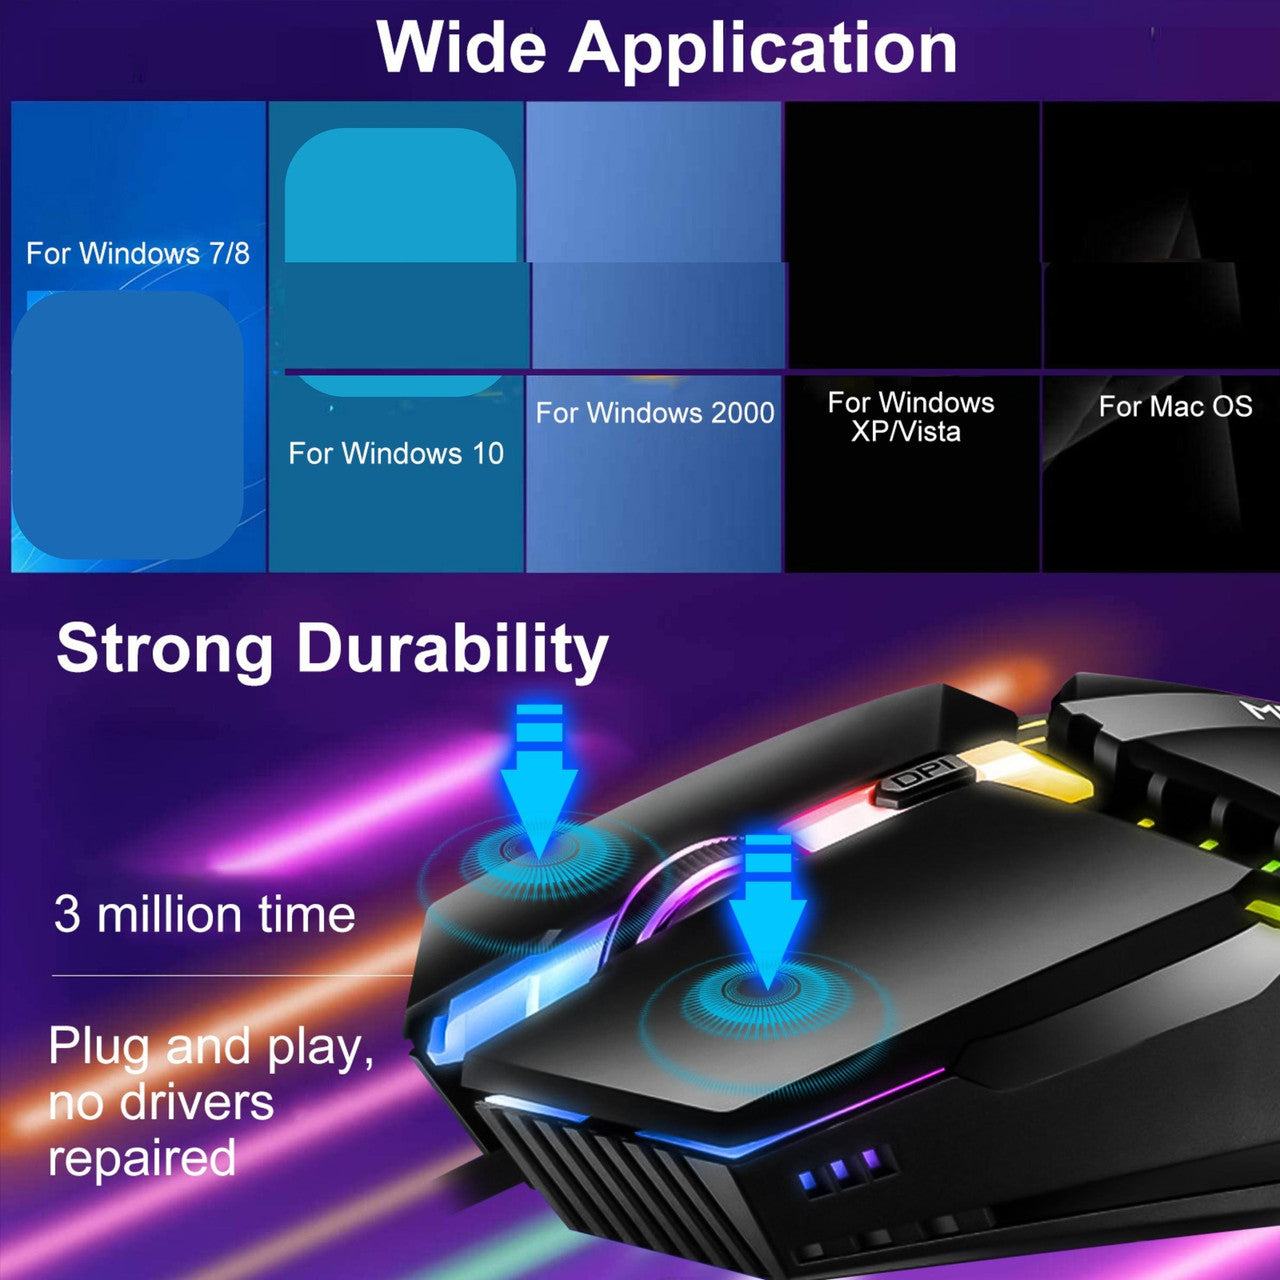 LED PC Gaming Mouse Wired - USB Optical Computer Mouse with Rgb Backlit, 3 Adjustable Dpi up to 1600, 7 Light Effects, Ergonomic Gamer Laptop PC Mouse